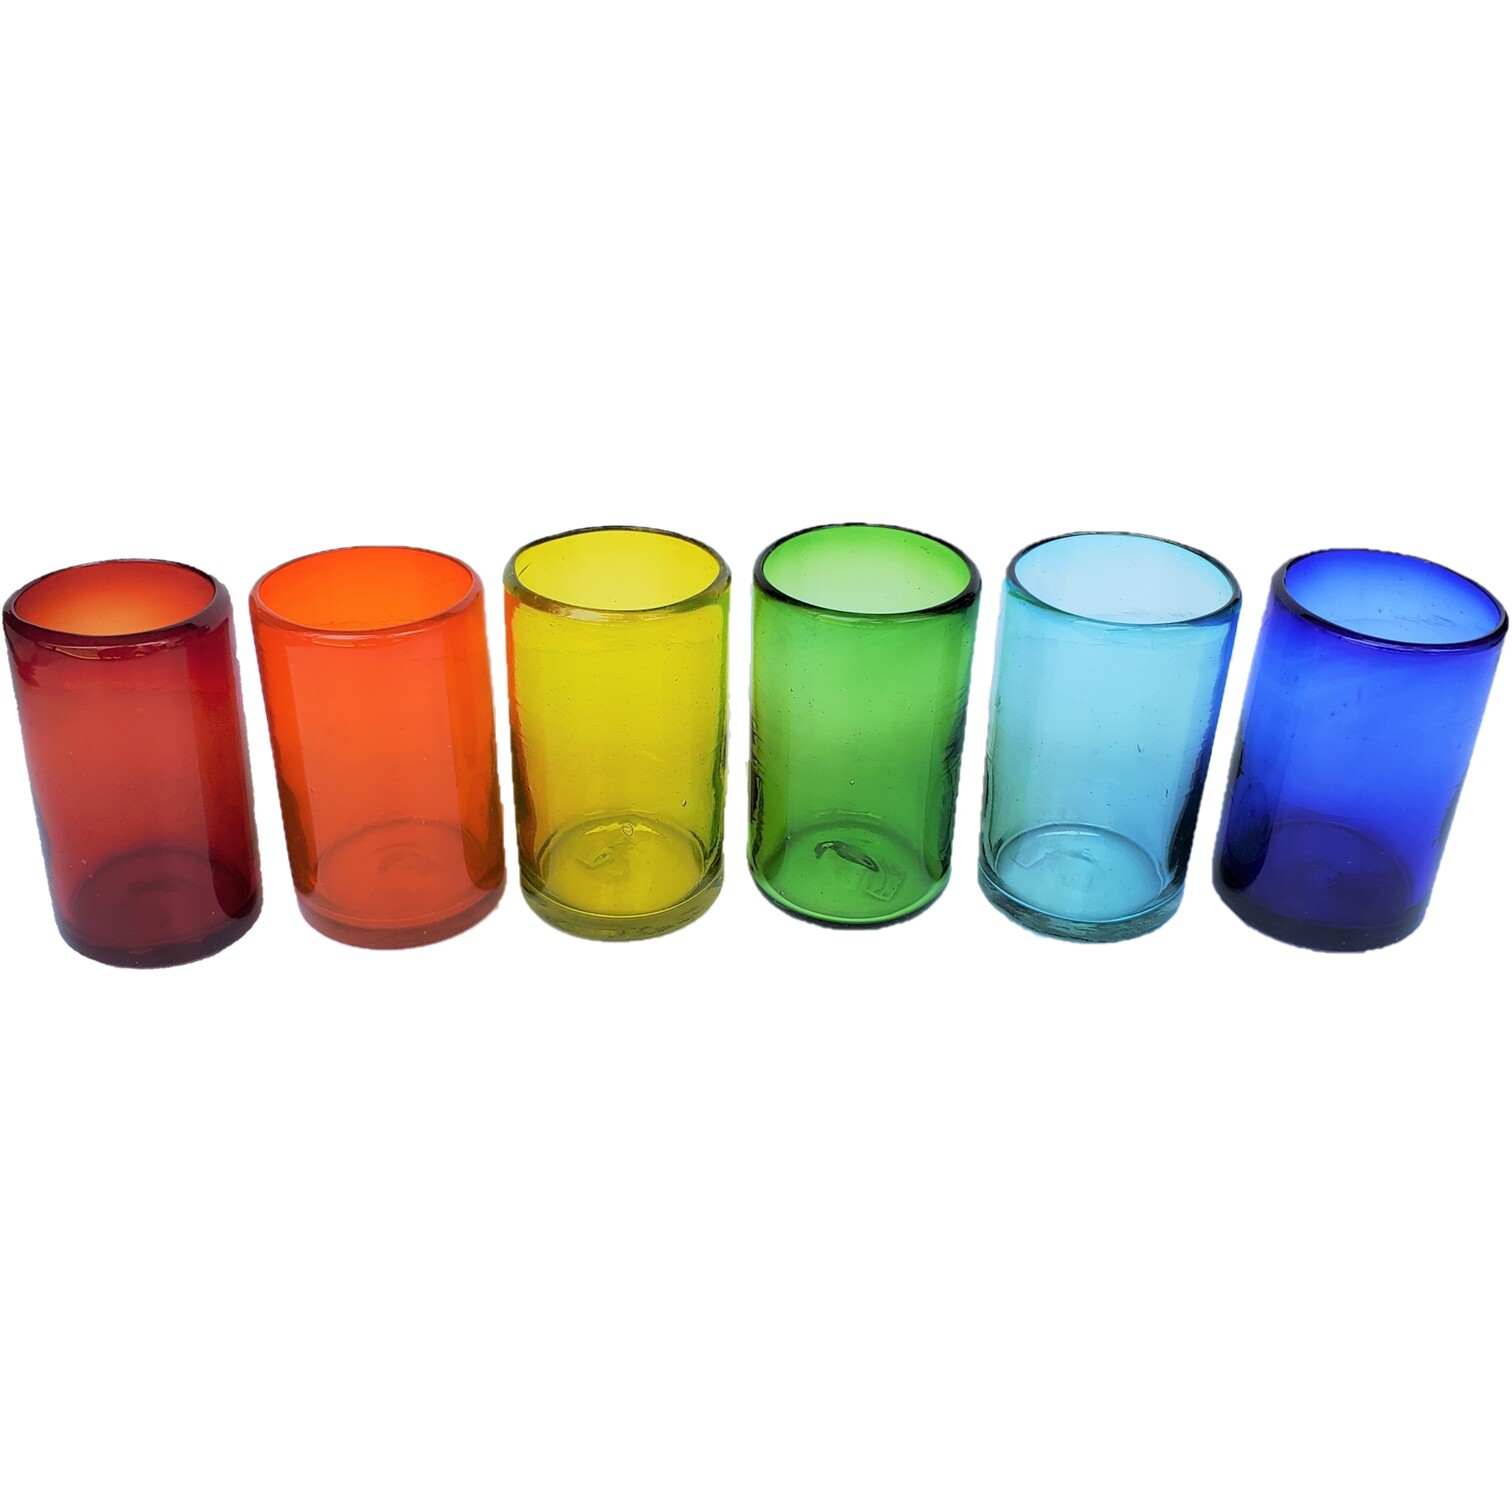 Colored Glassware / Rainbow Colored drinking glasses (set of 6) / These handcrafted glasses deliver a classic touch to your favorite drink.